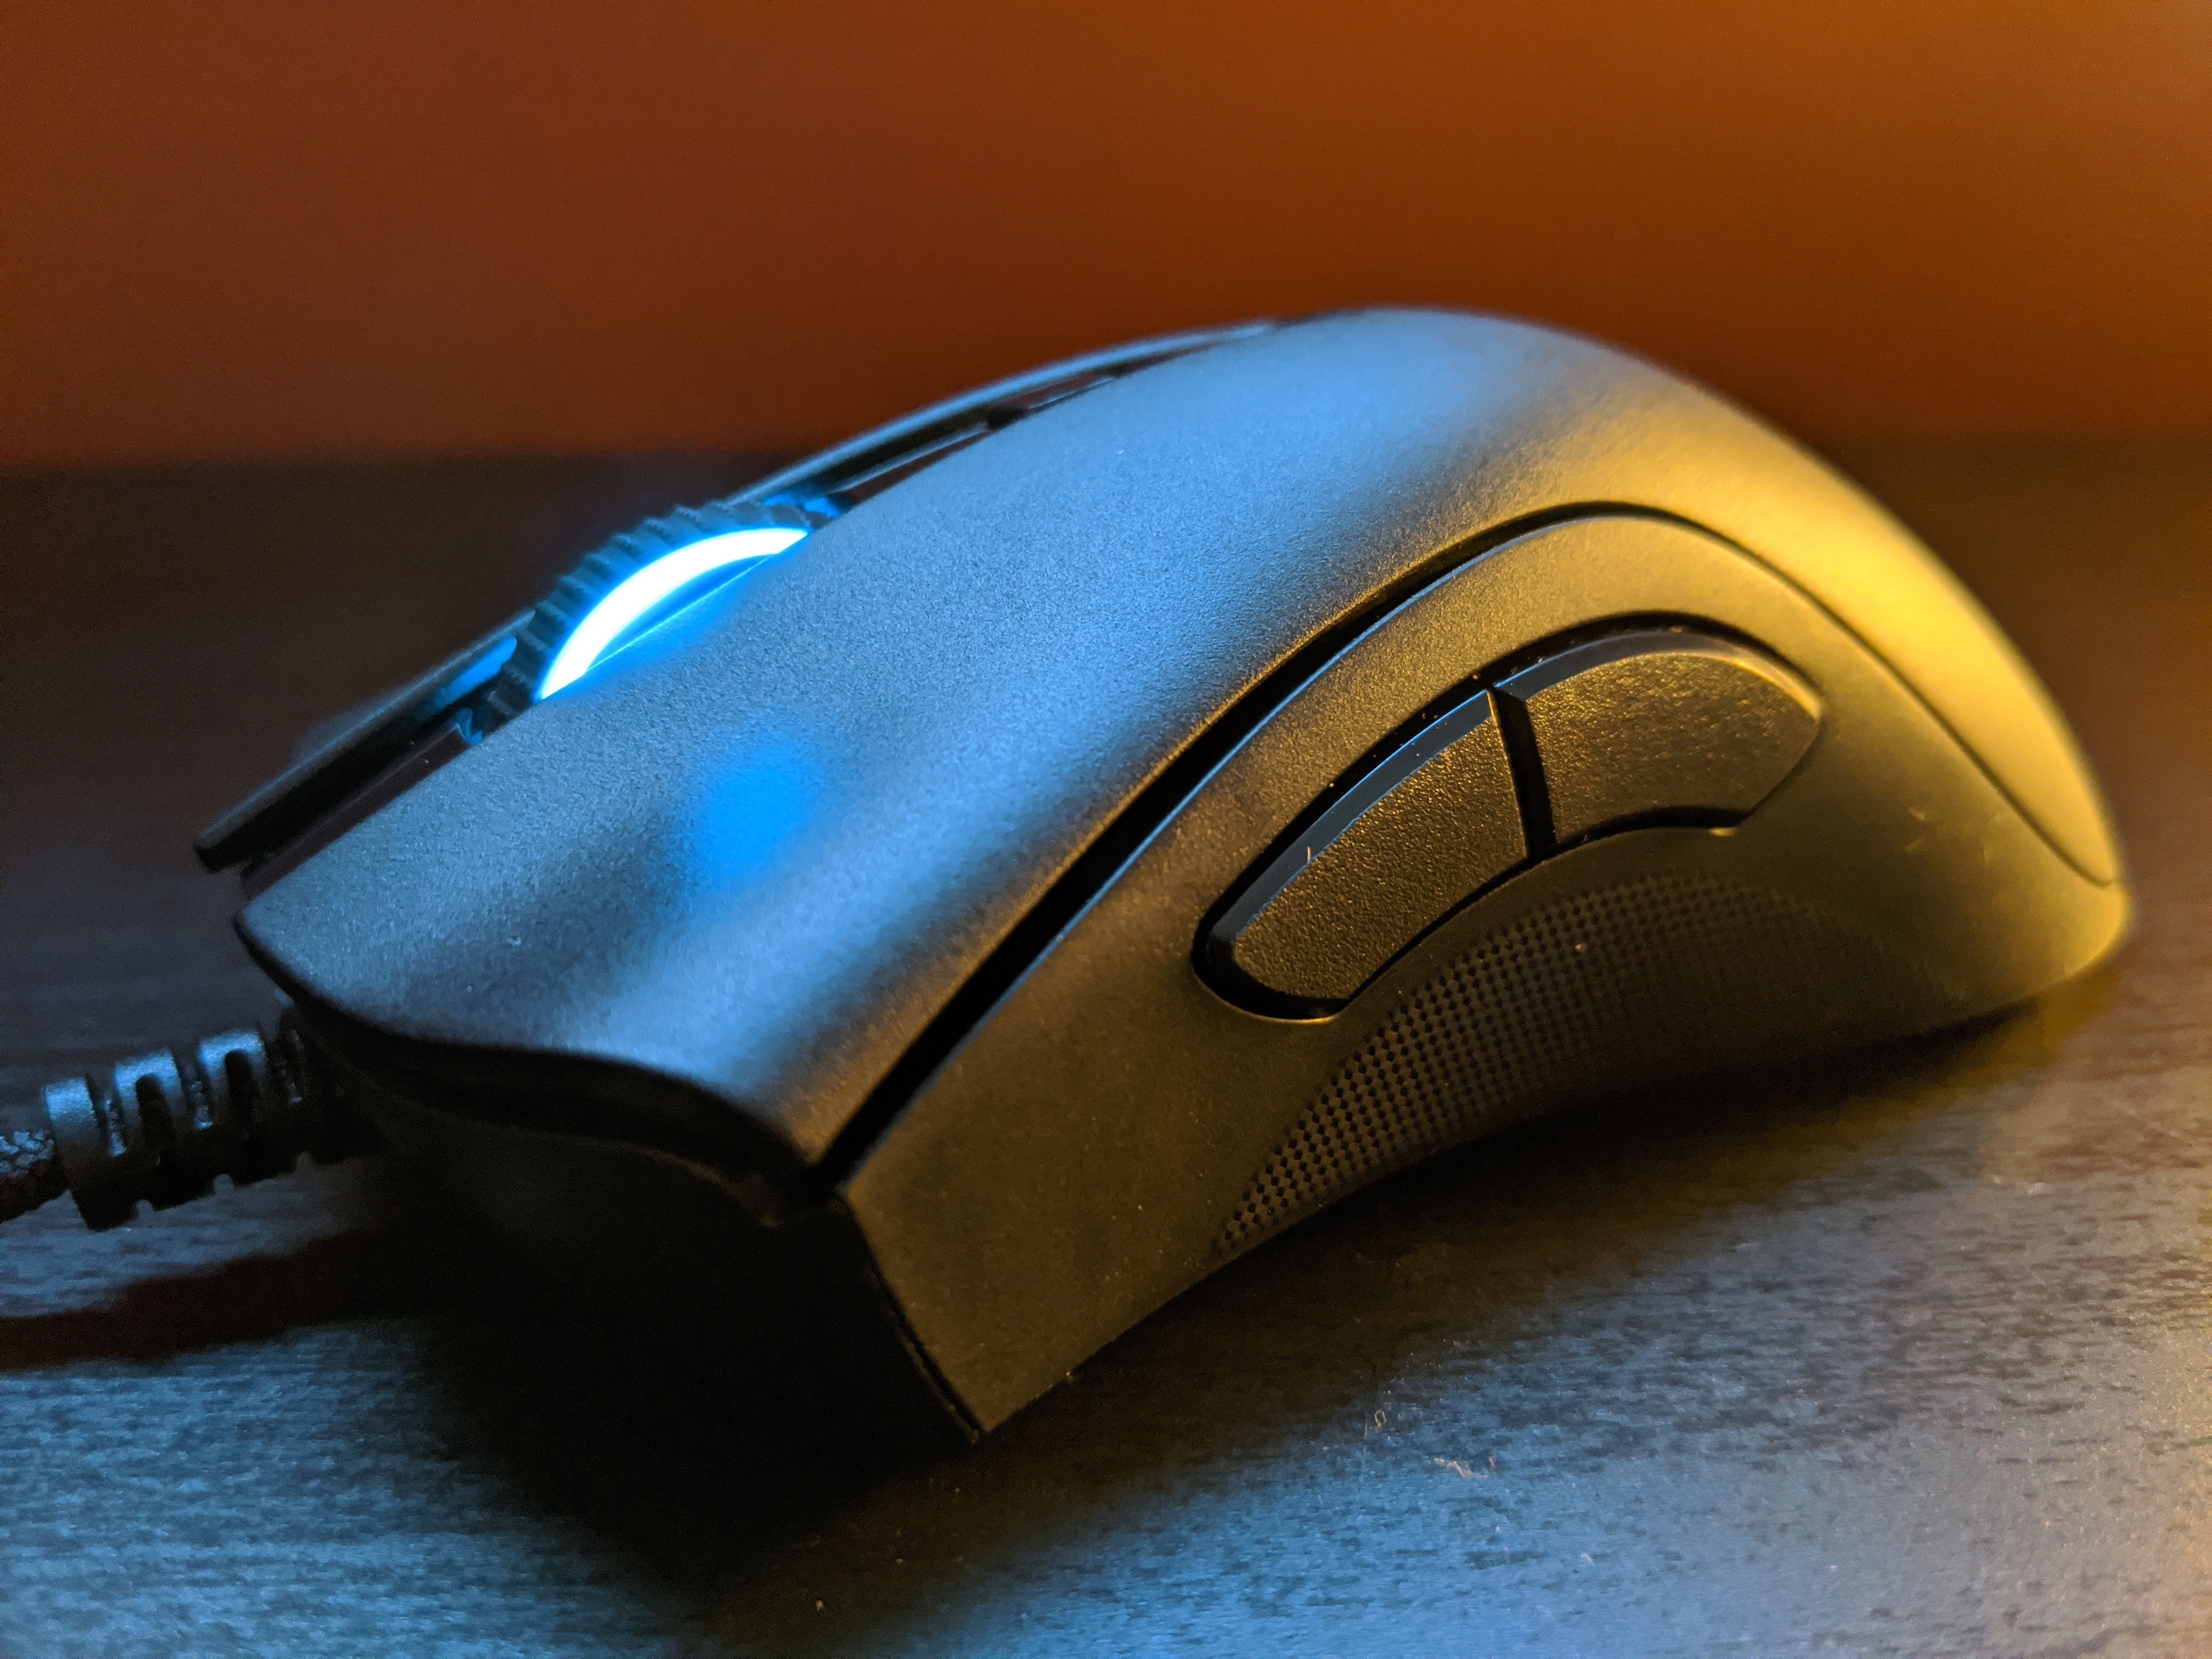 Razer DeathAdder V2 review: We like the upgrades, but what's with the